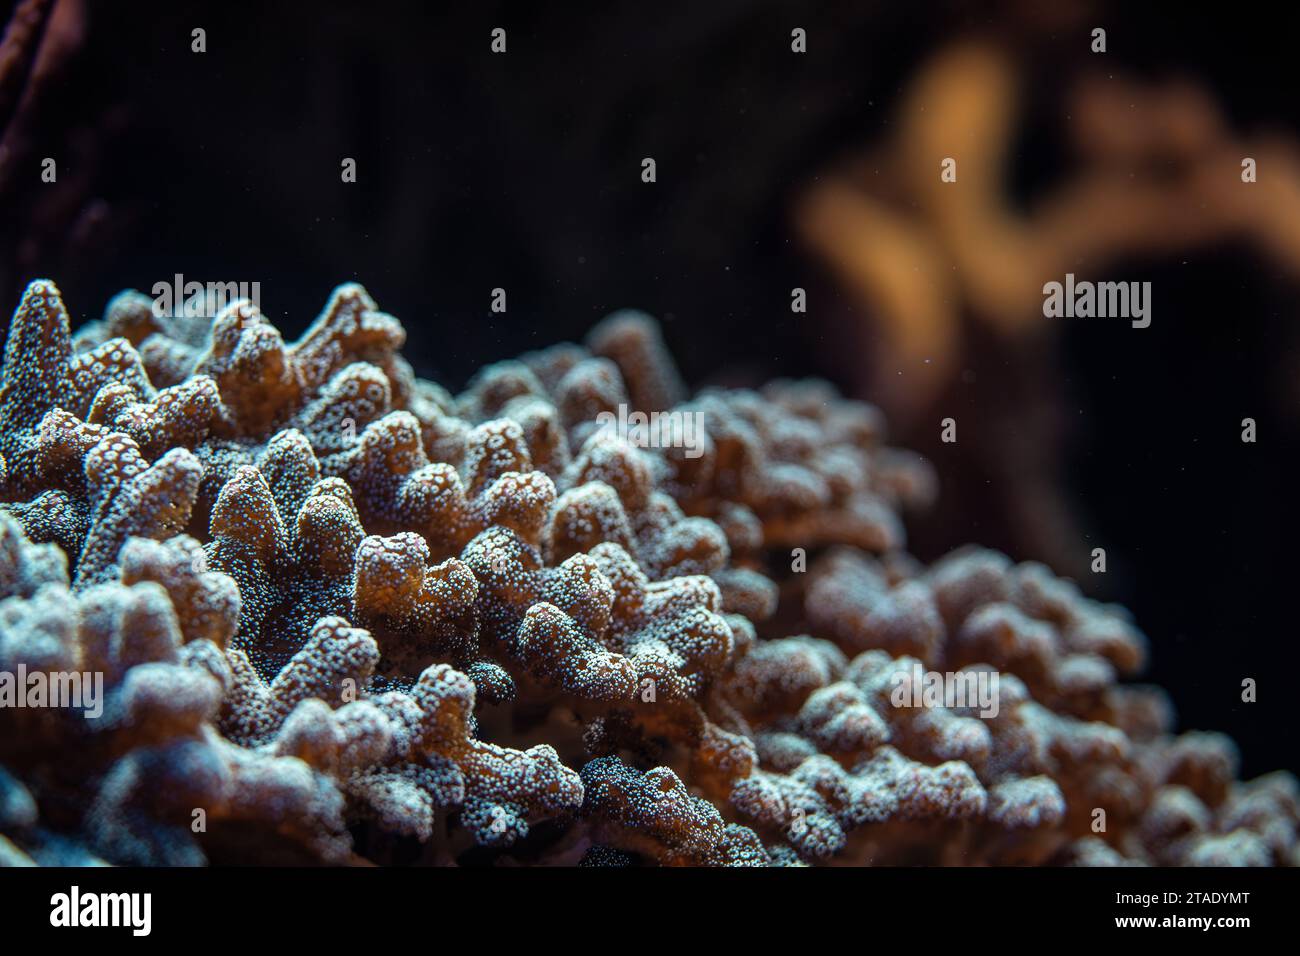 Underwater photo, close up of coral, Pocillopora species, emitting fluorescent light. Abstract marine background Stock Photo